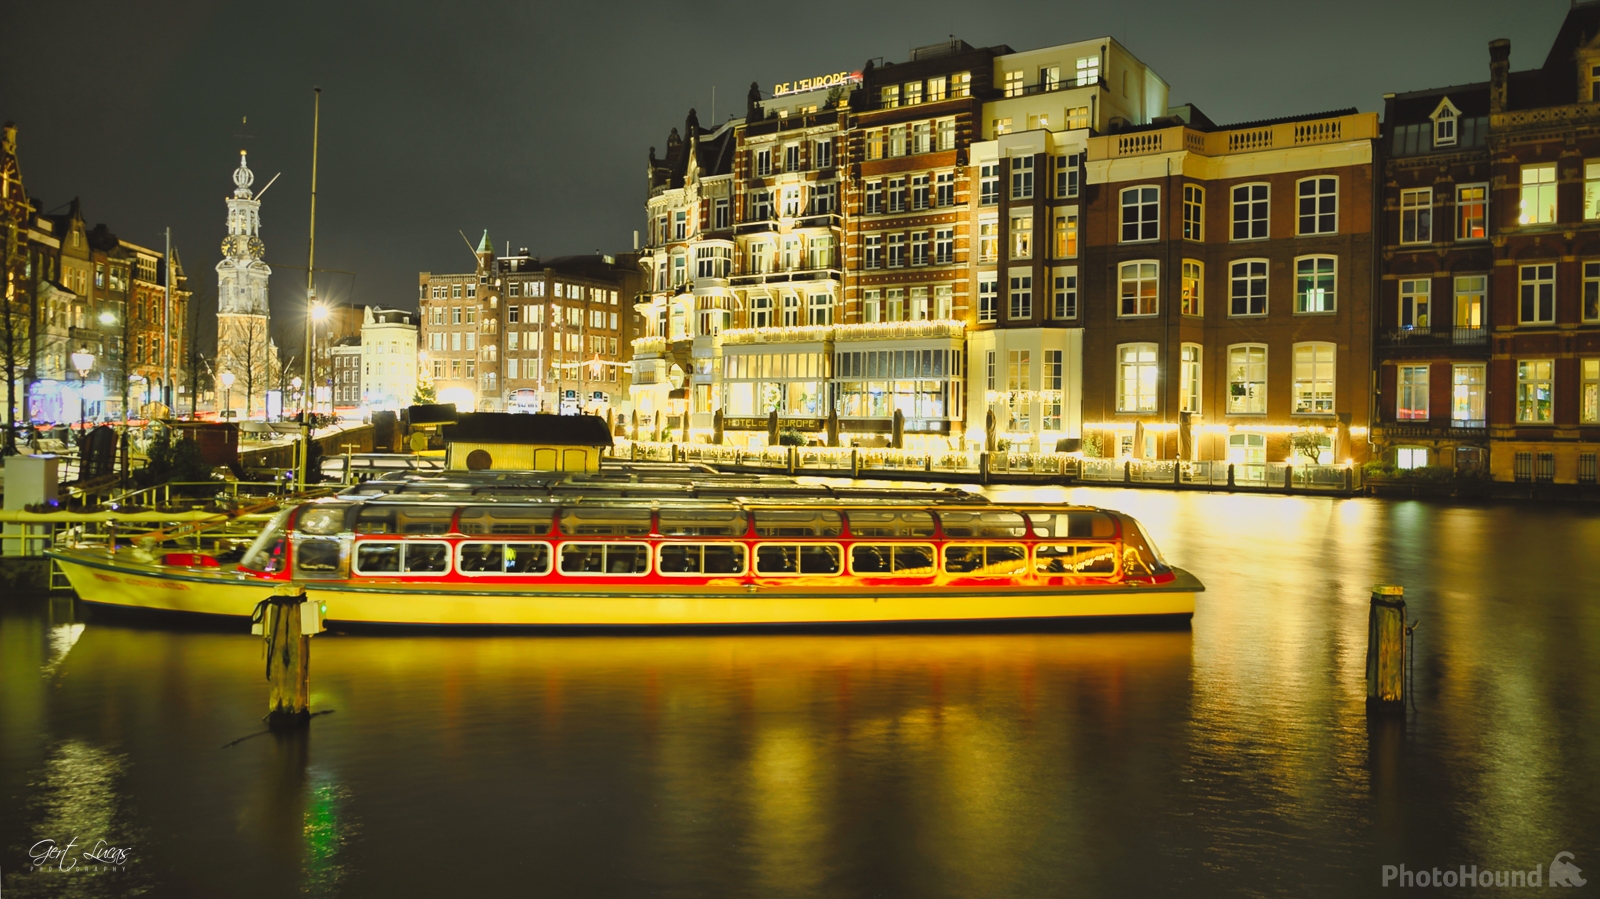 Image of Amstelriver and Munt Plaza by Gert Lucas